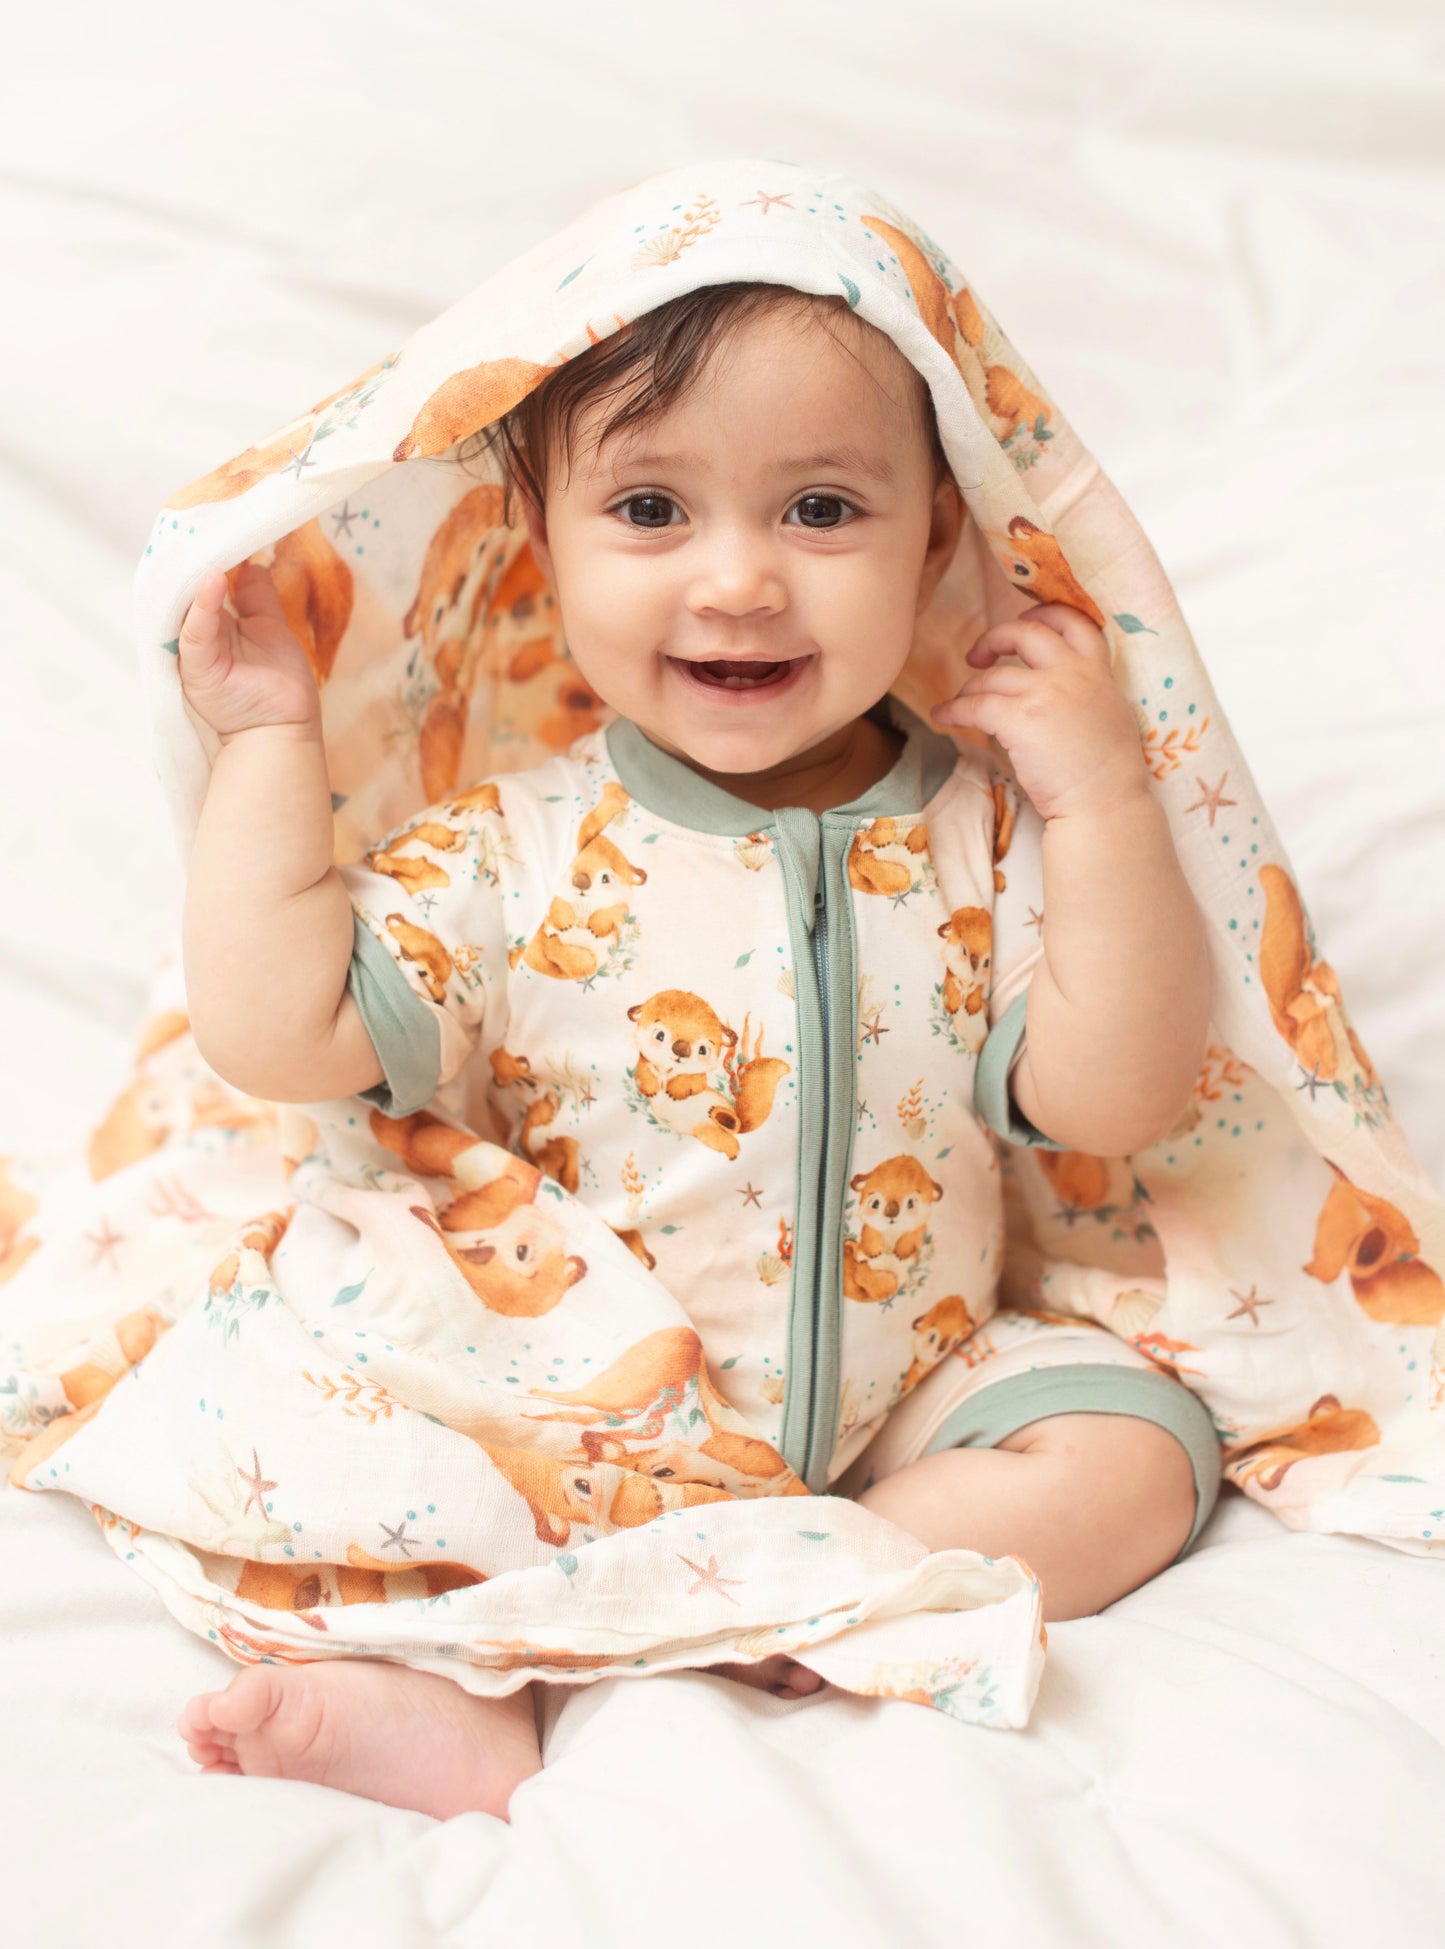 Otterly Adorable Muslin Swaddle